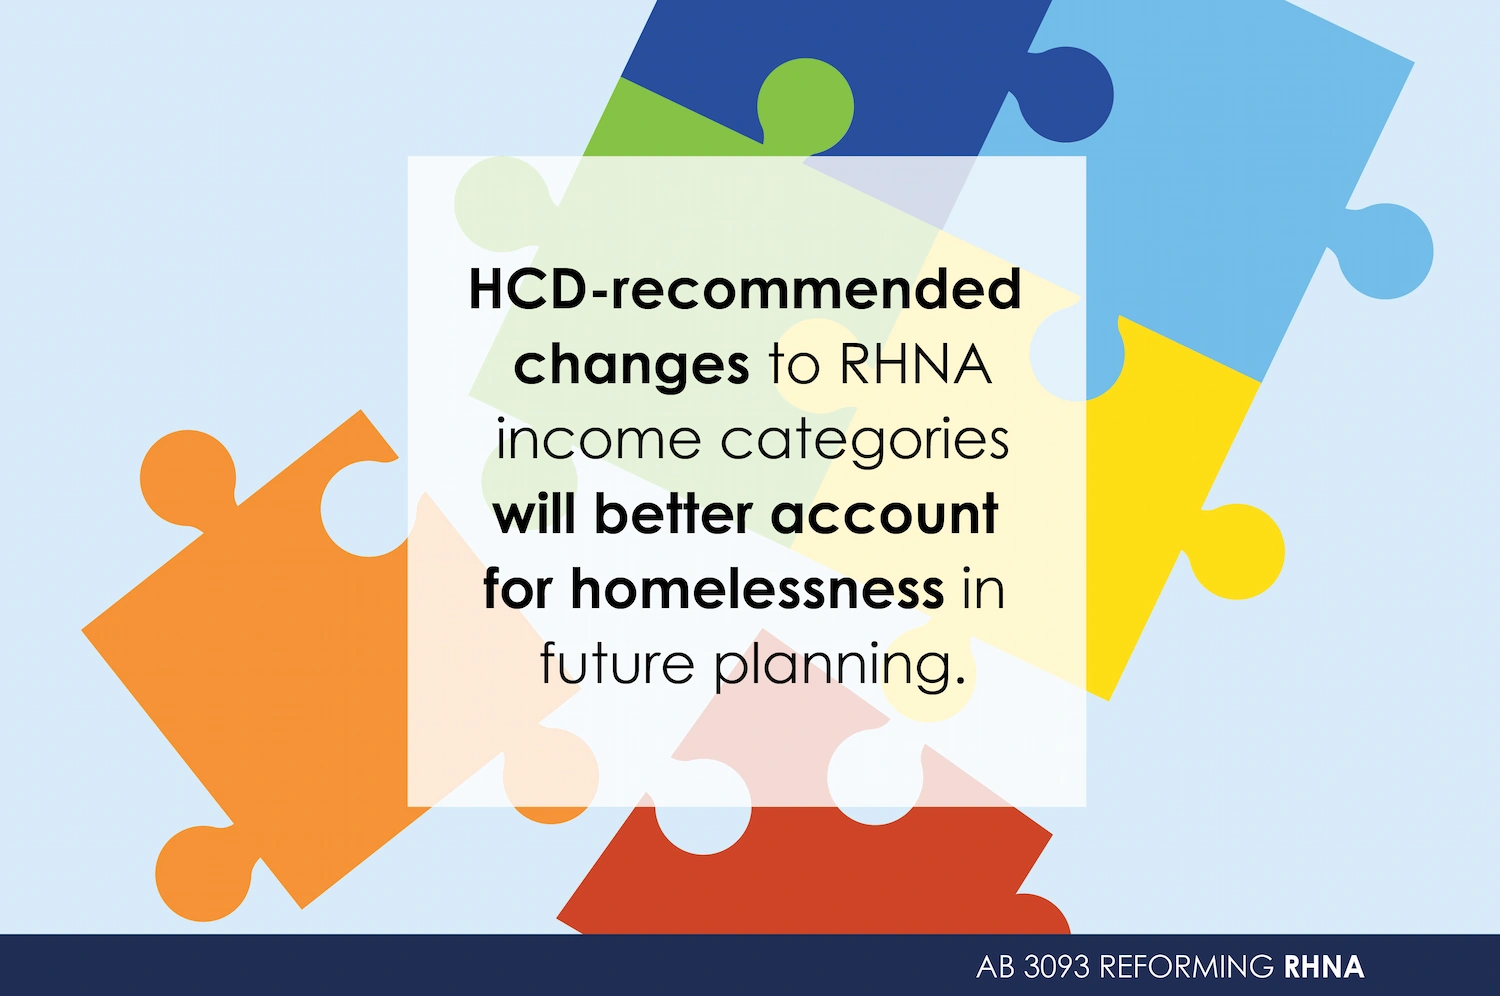 HCD-recommended changes to RHNA income categories will better account for homelessness in future planning.